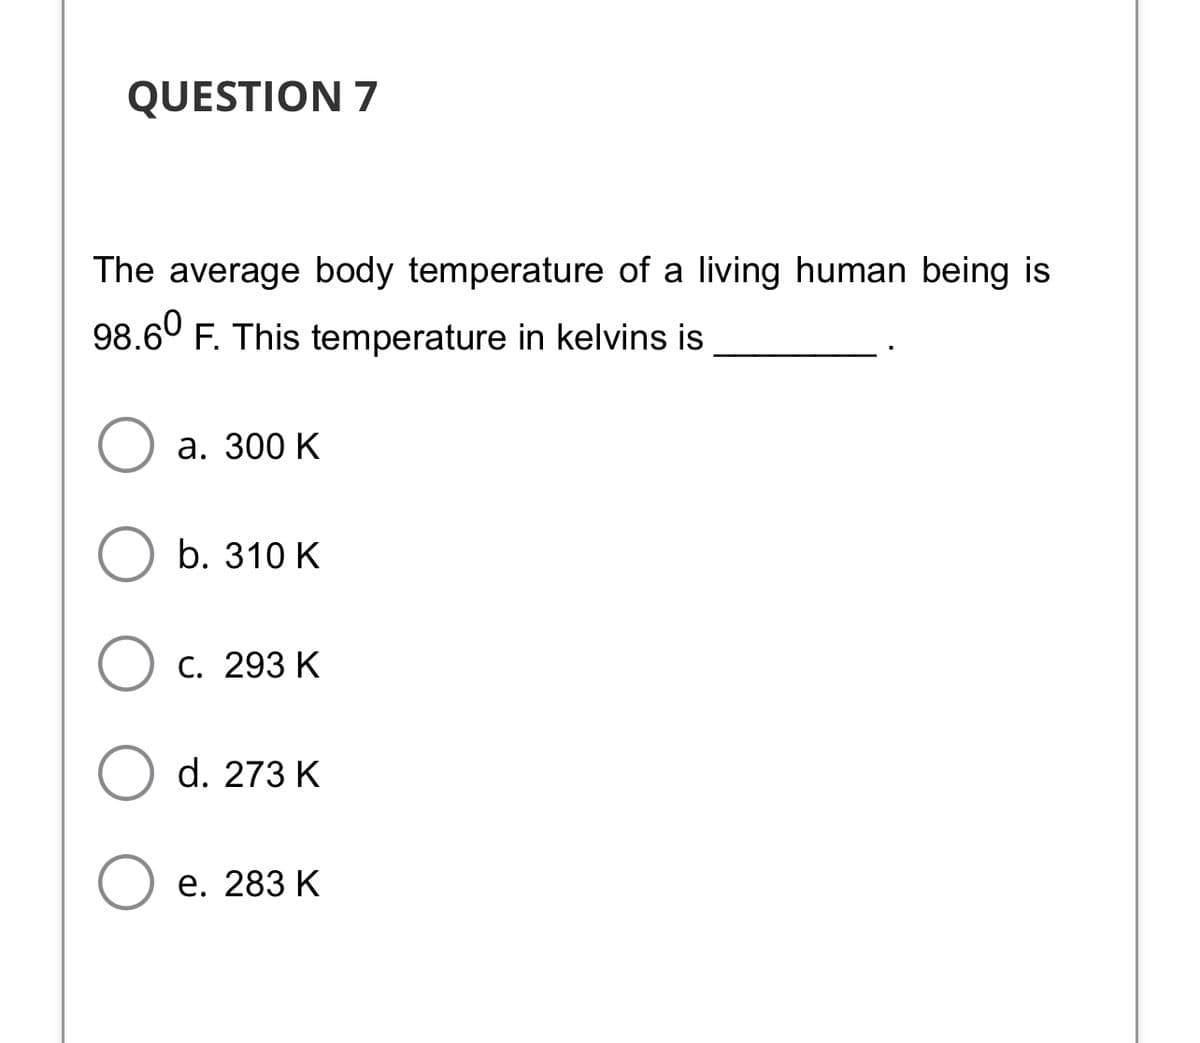 QUESTION 7
The average body temperature of a living human being is
98.6° F. This temperature in kelvins is
а. 300 K
b. 310 K
C. 293 K
d. 273 K
е. 283 К
